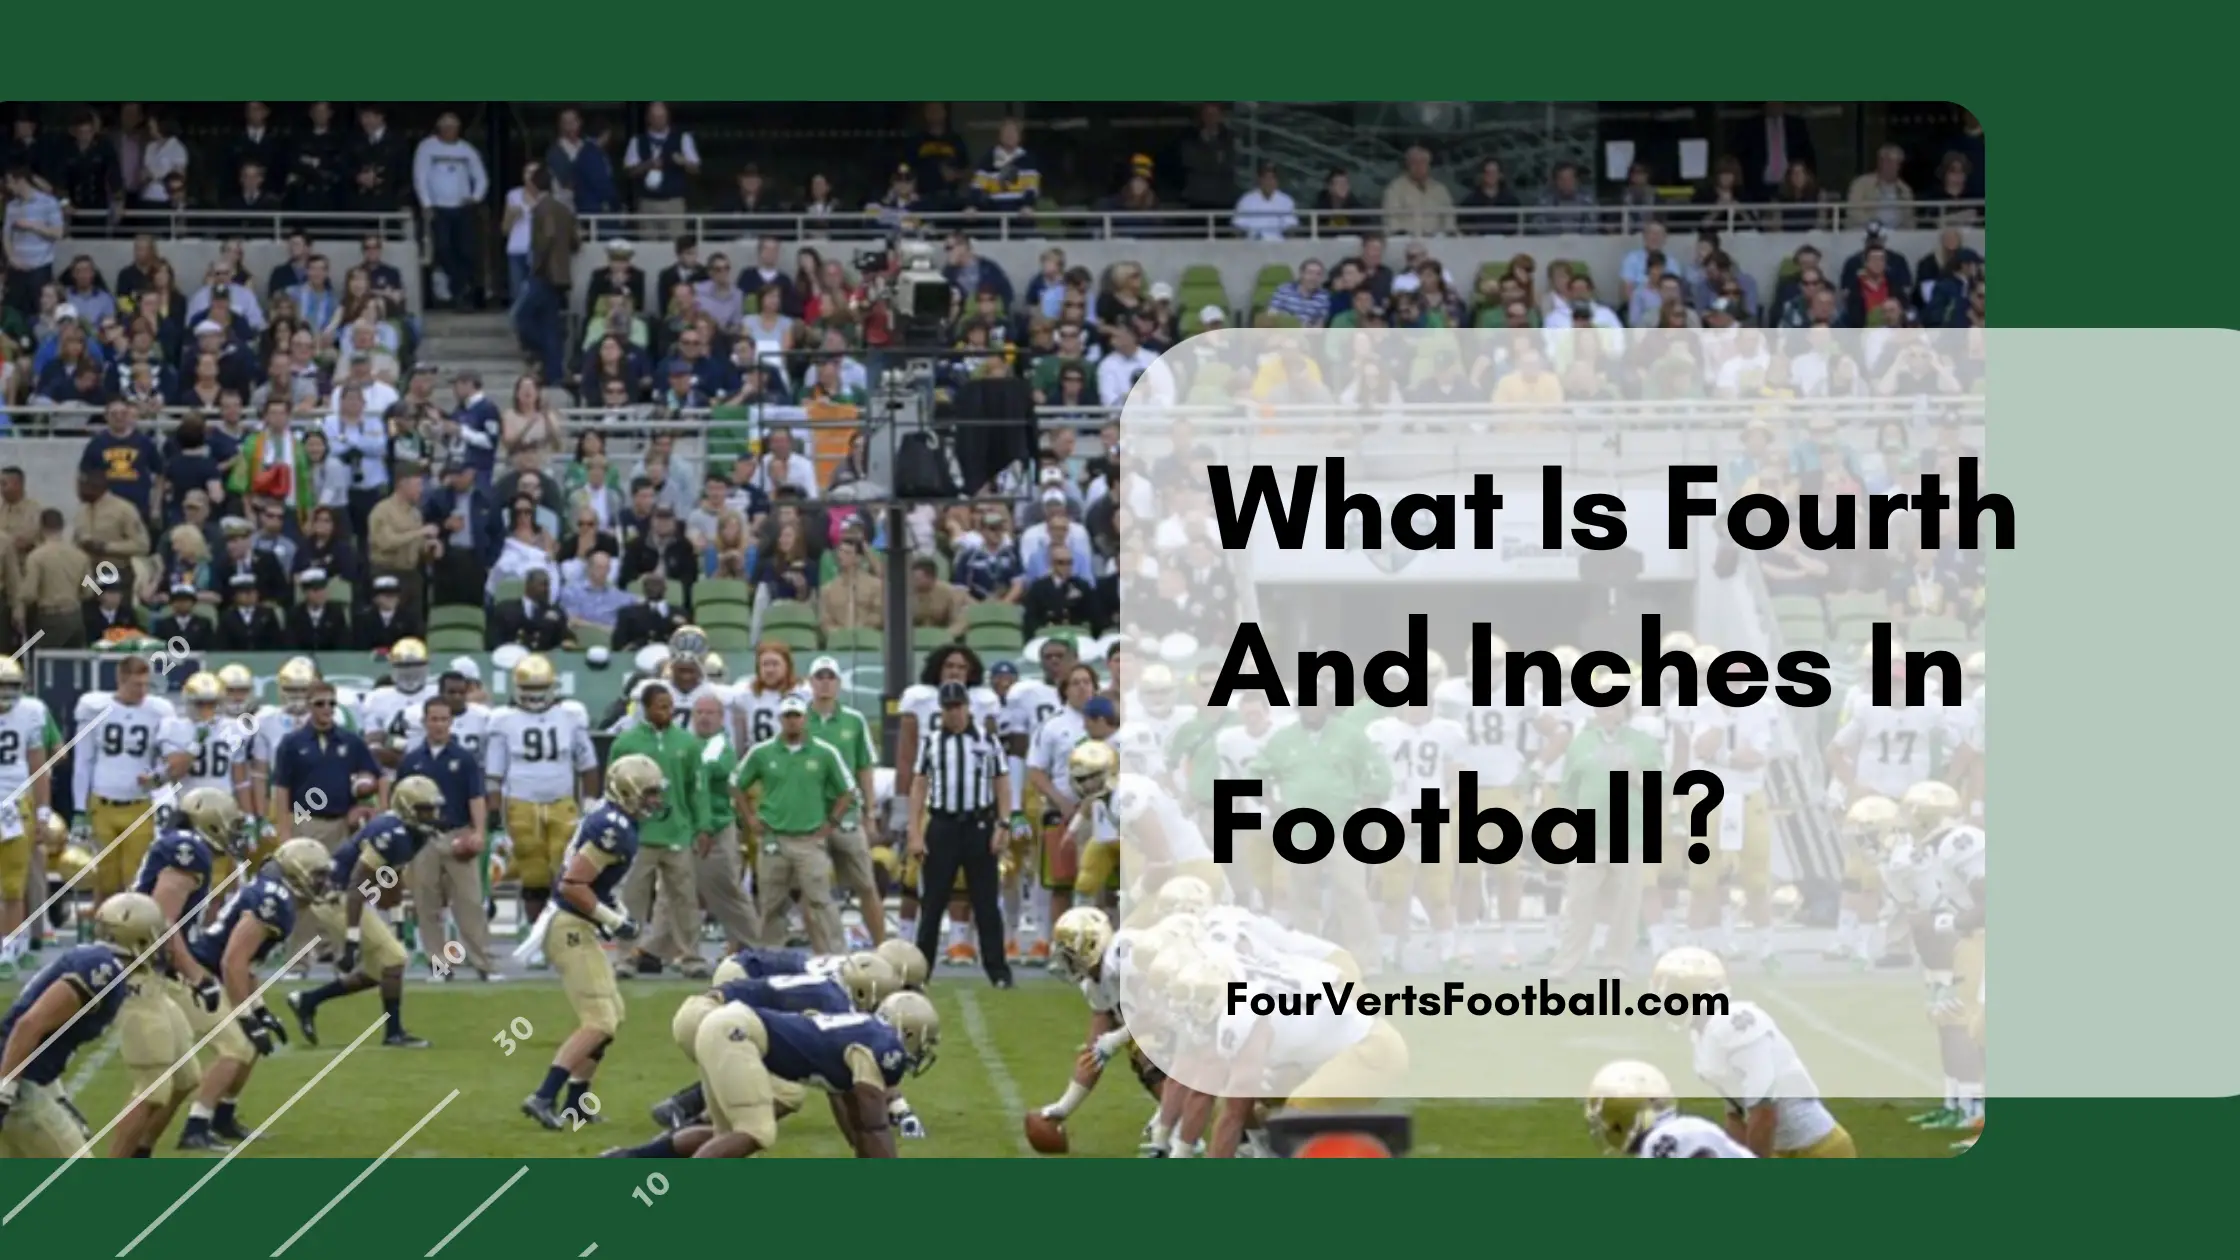 What Is Fourth And Inches In Football?